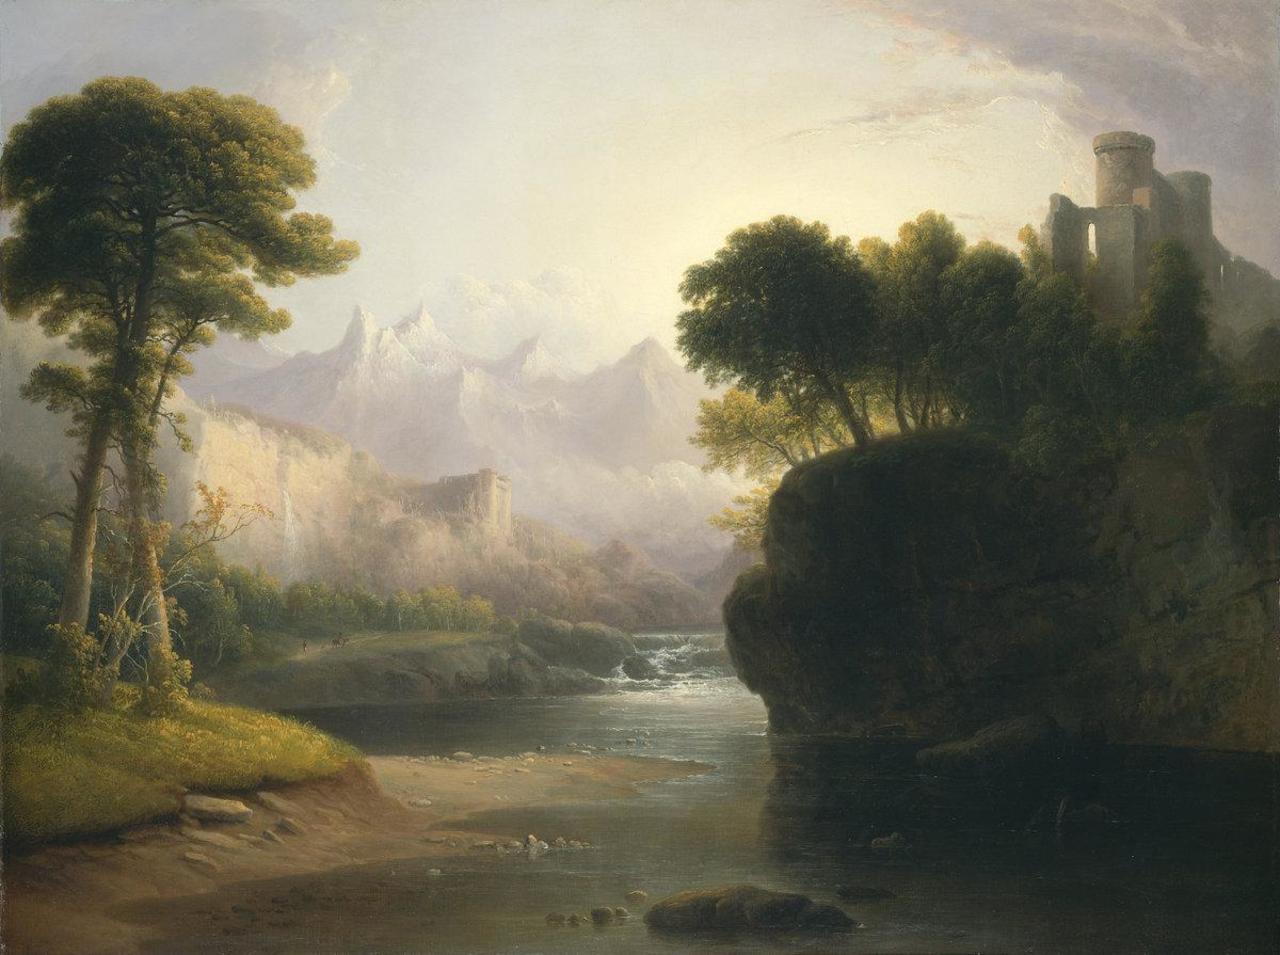 Fanciful Landscape by Thomas Doughty, 1834 #art #painting http://t.co/Rpxvh4eBx6